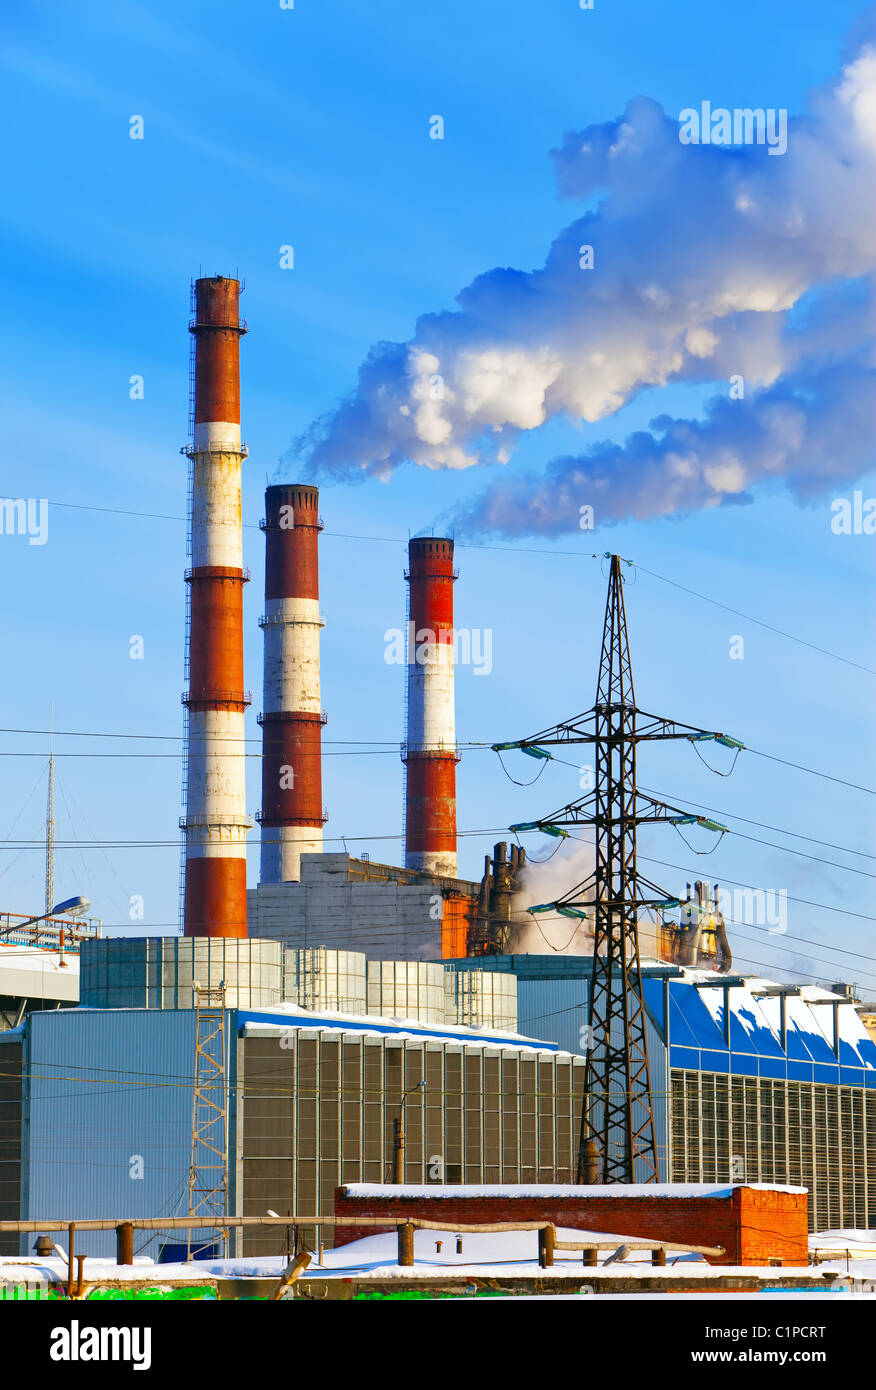 Thermal power station pipes smoke over a city. Stock Photo